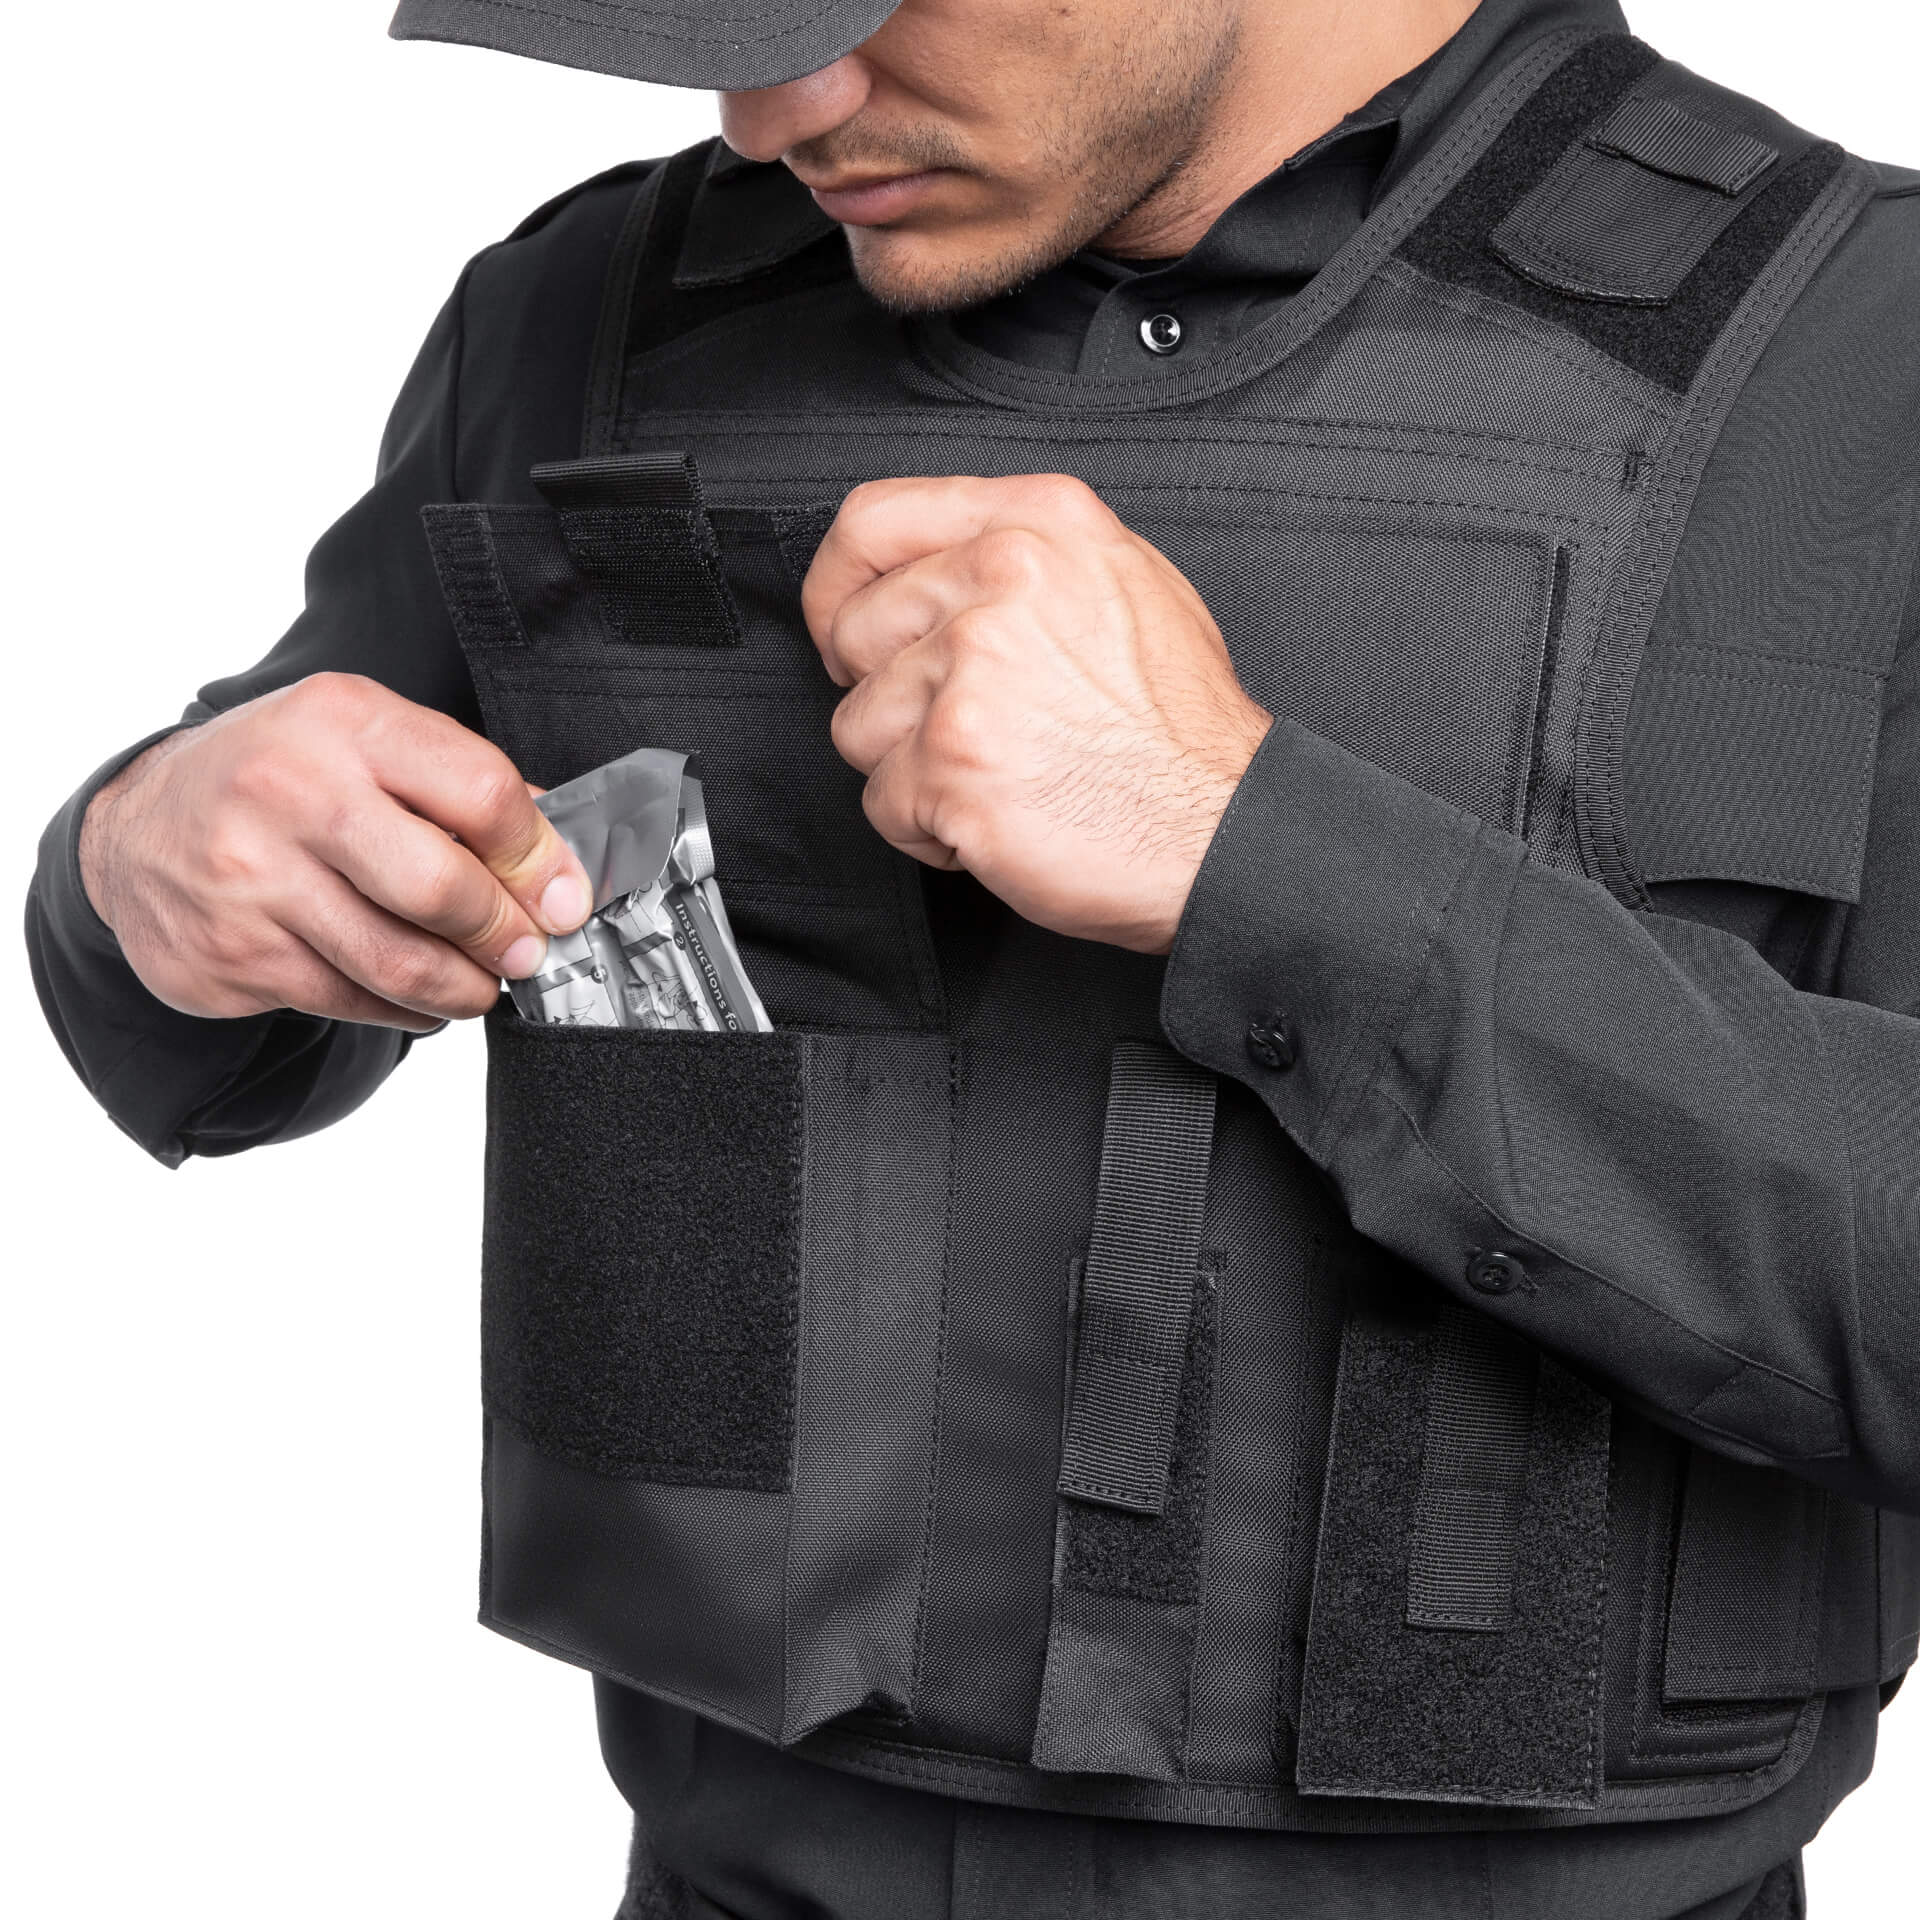 FREE First Responder Patch with BulletSafe Vest Purchase